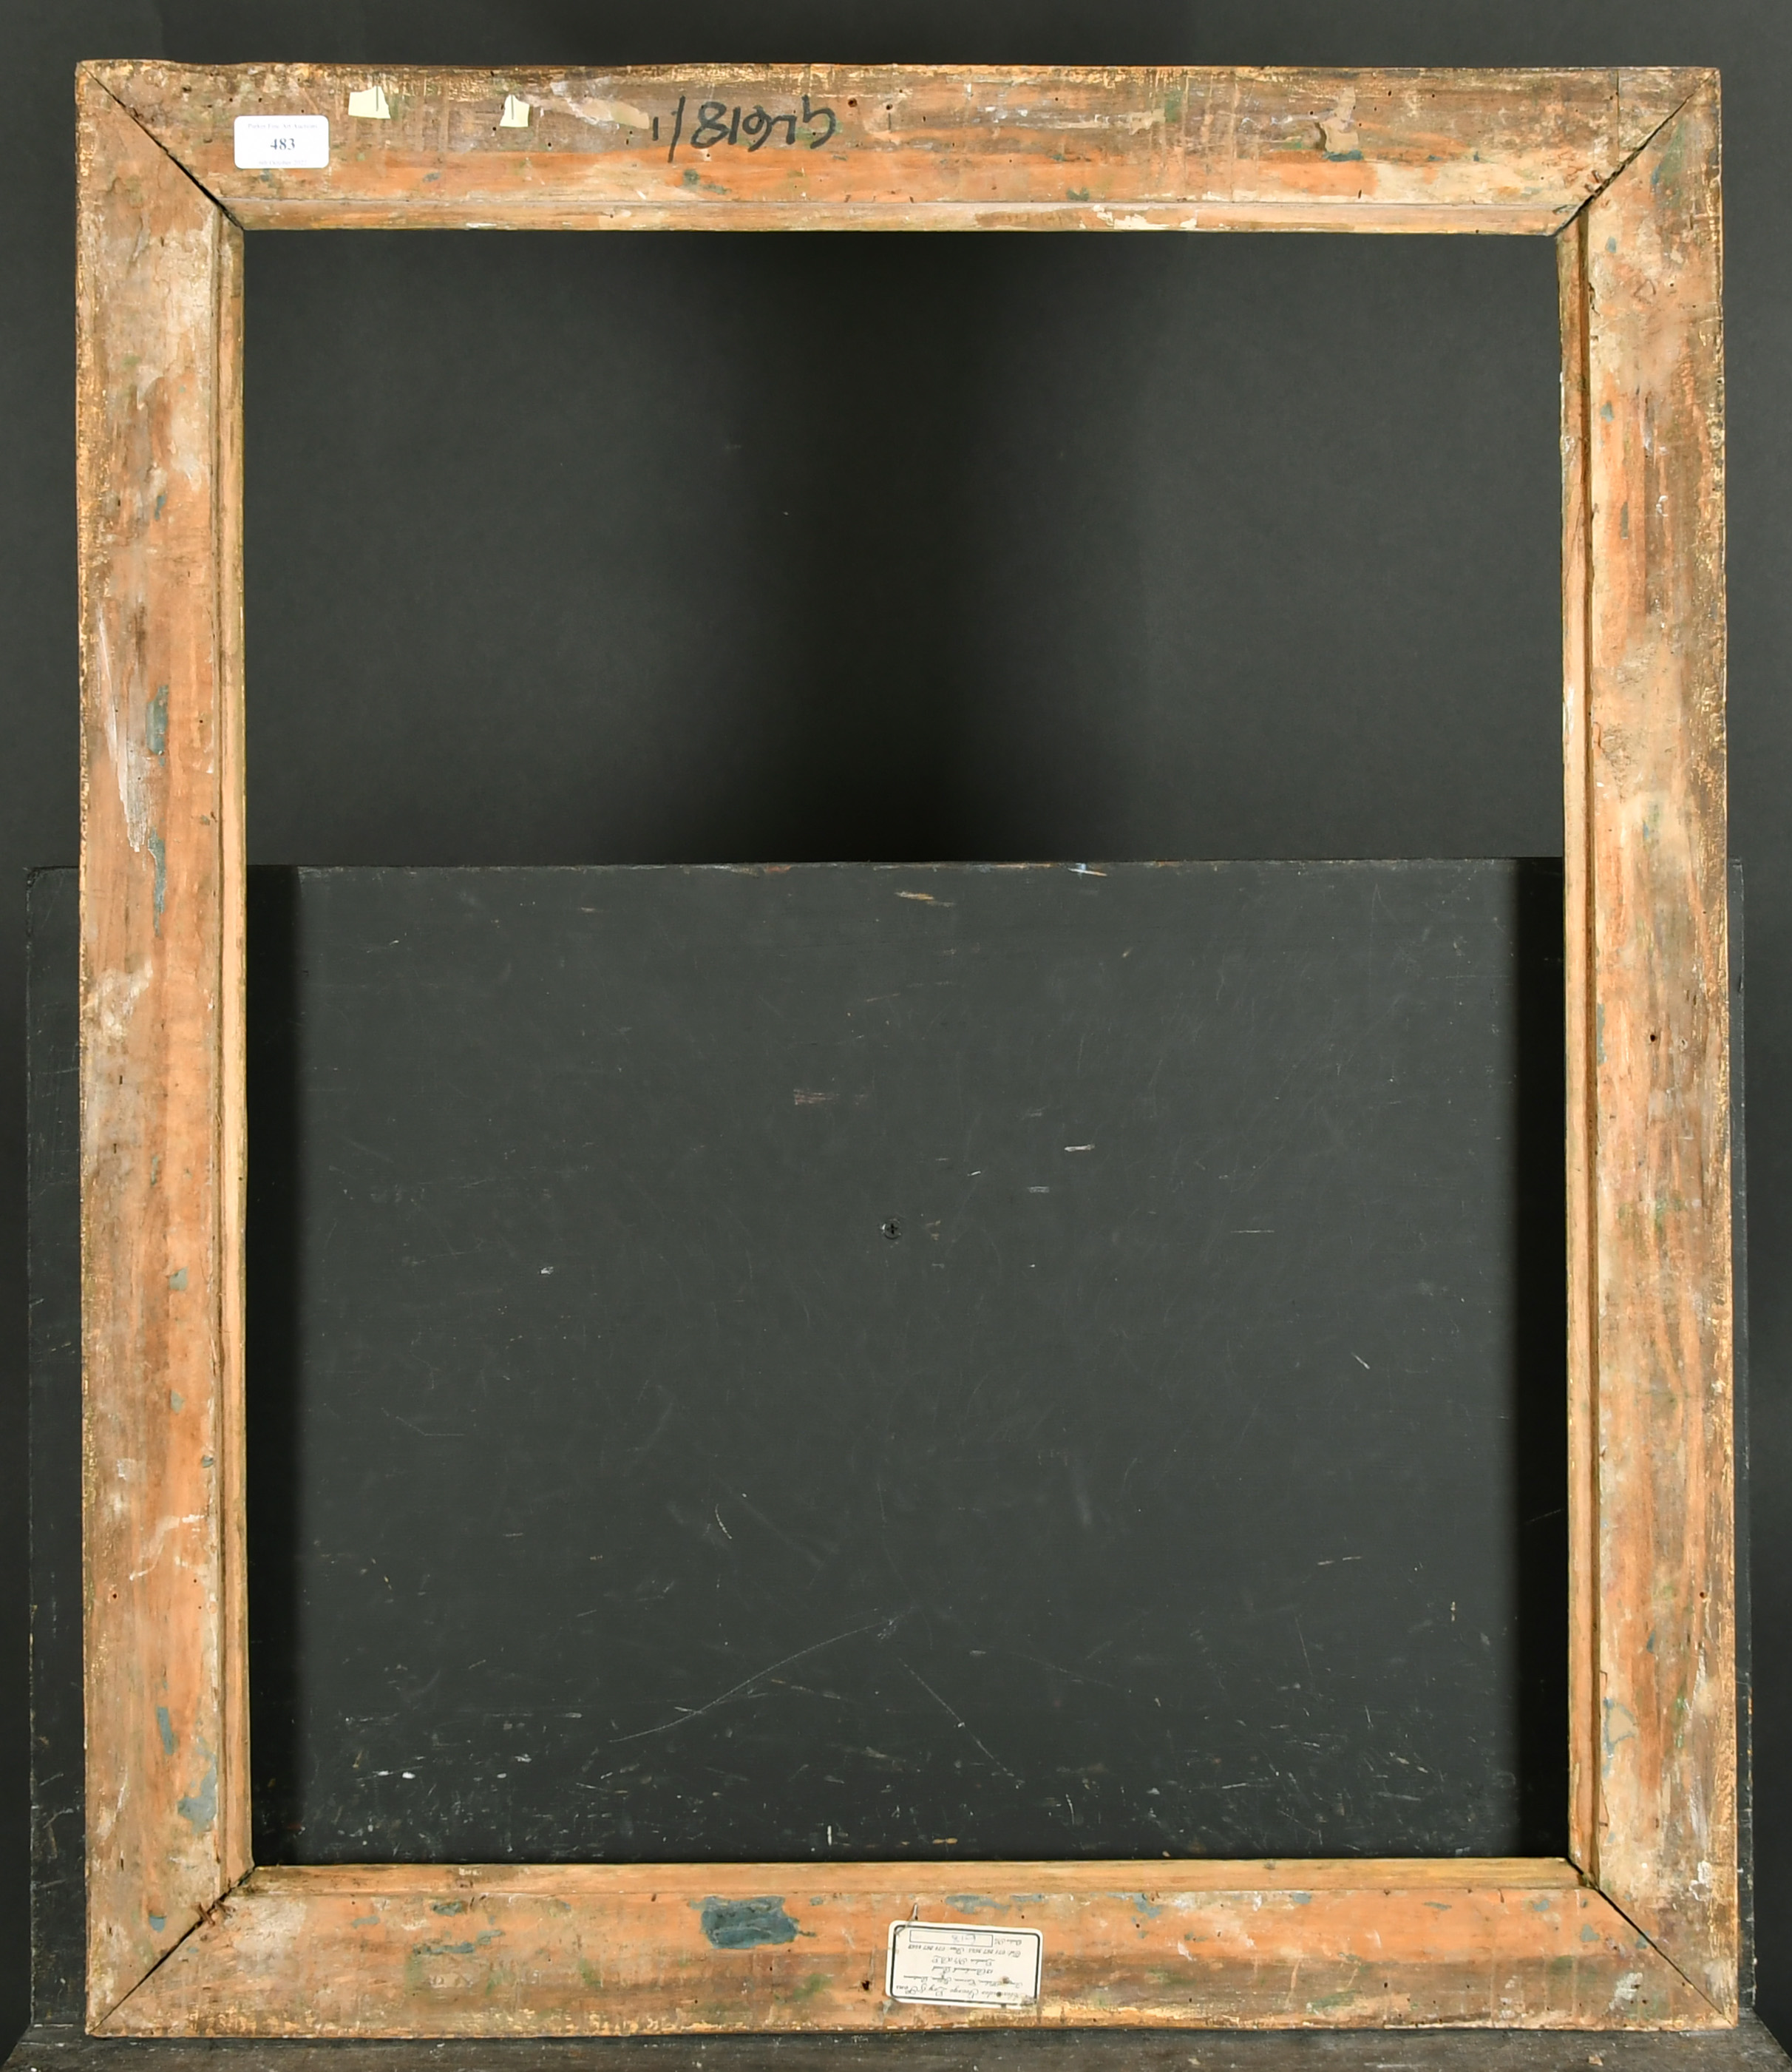 Early 19th Century French School. A Gilt Composition Empire Frame, rebate 27" x 22" (68.6 x 55.9cm) - Image 3 of 3